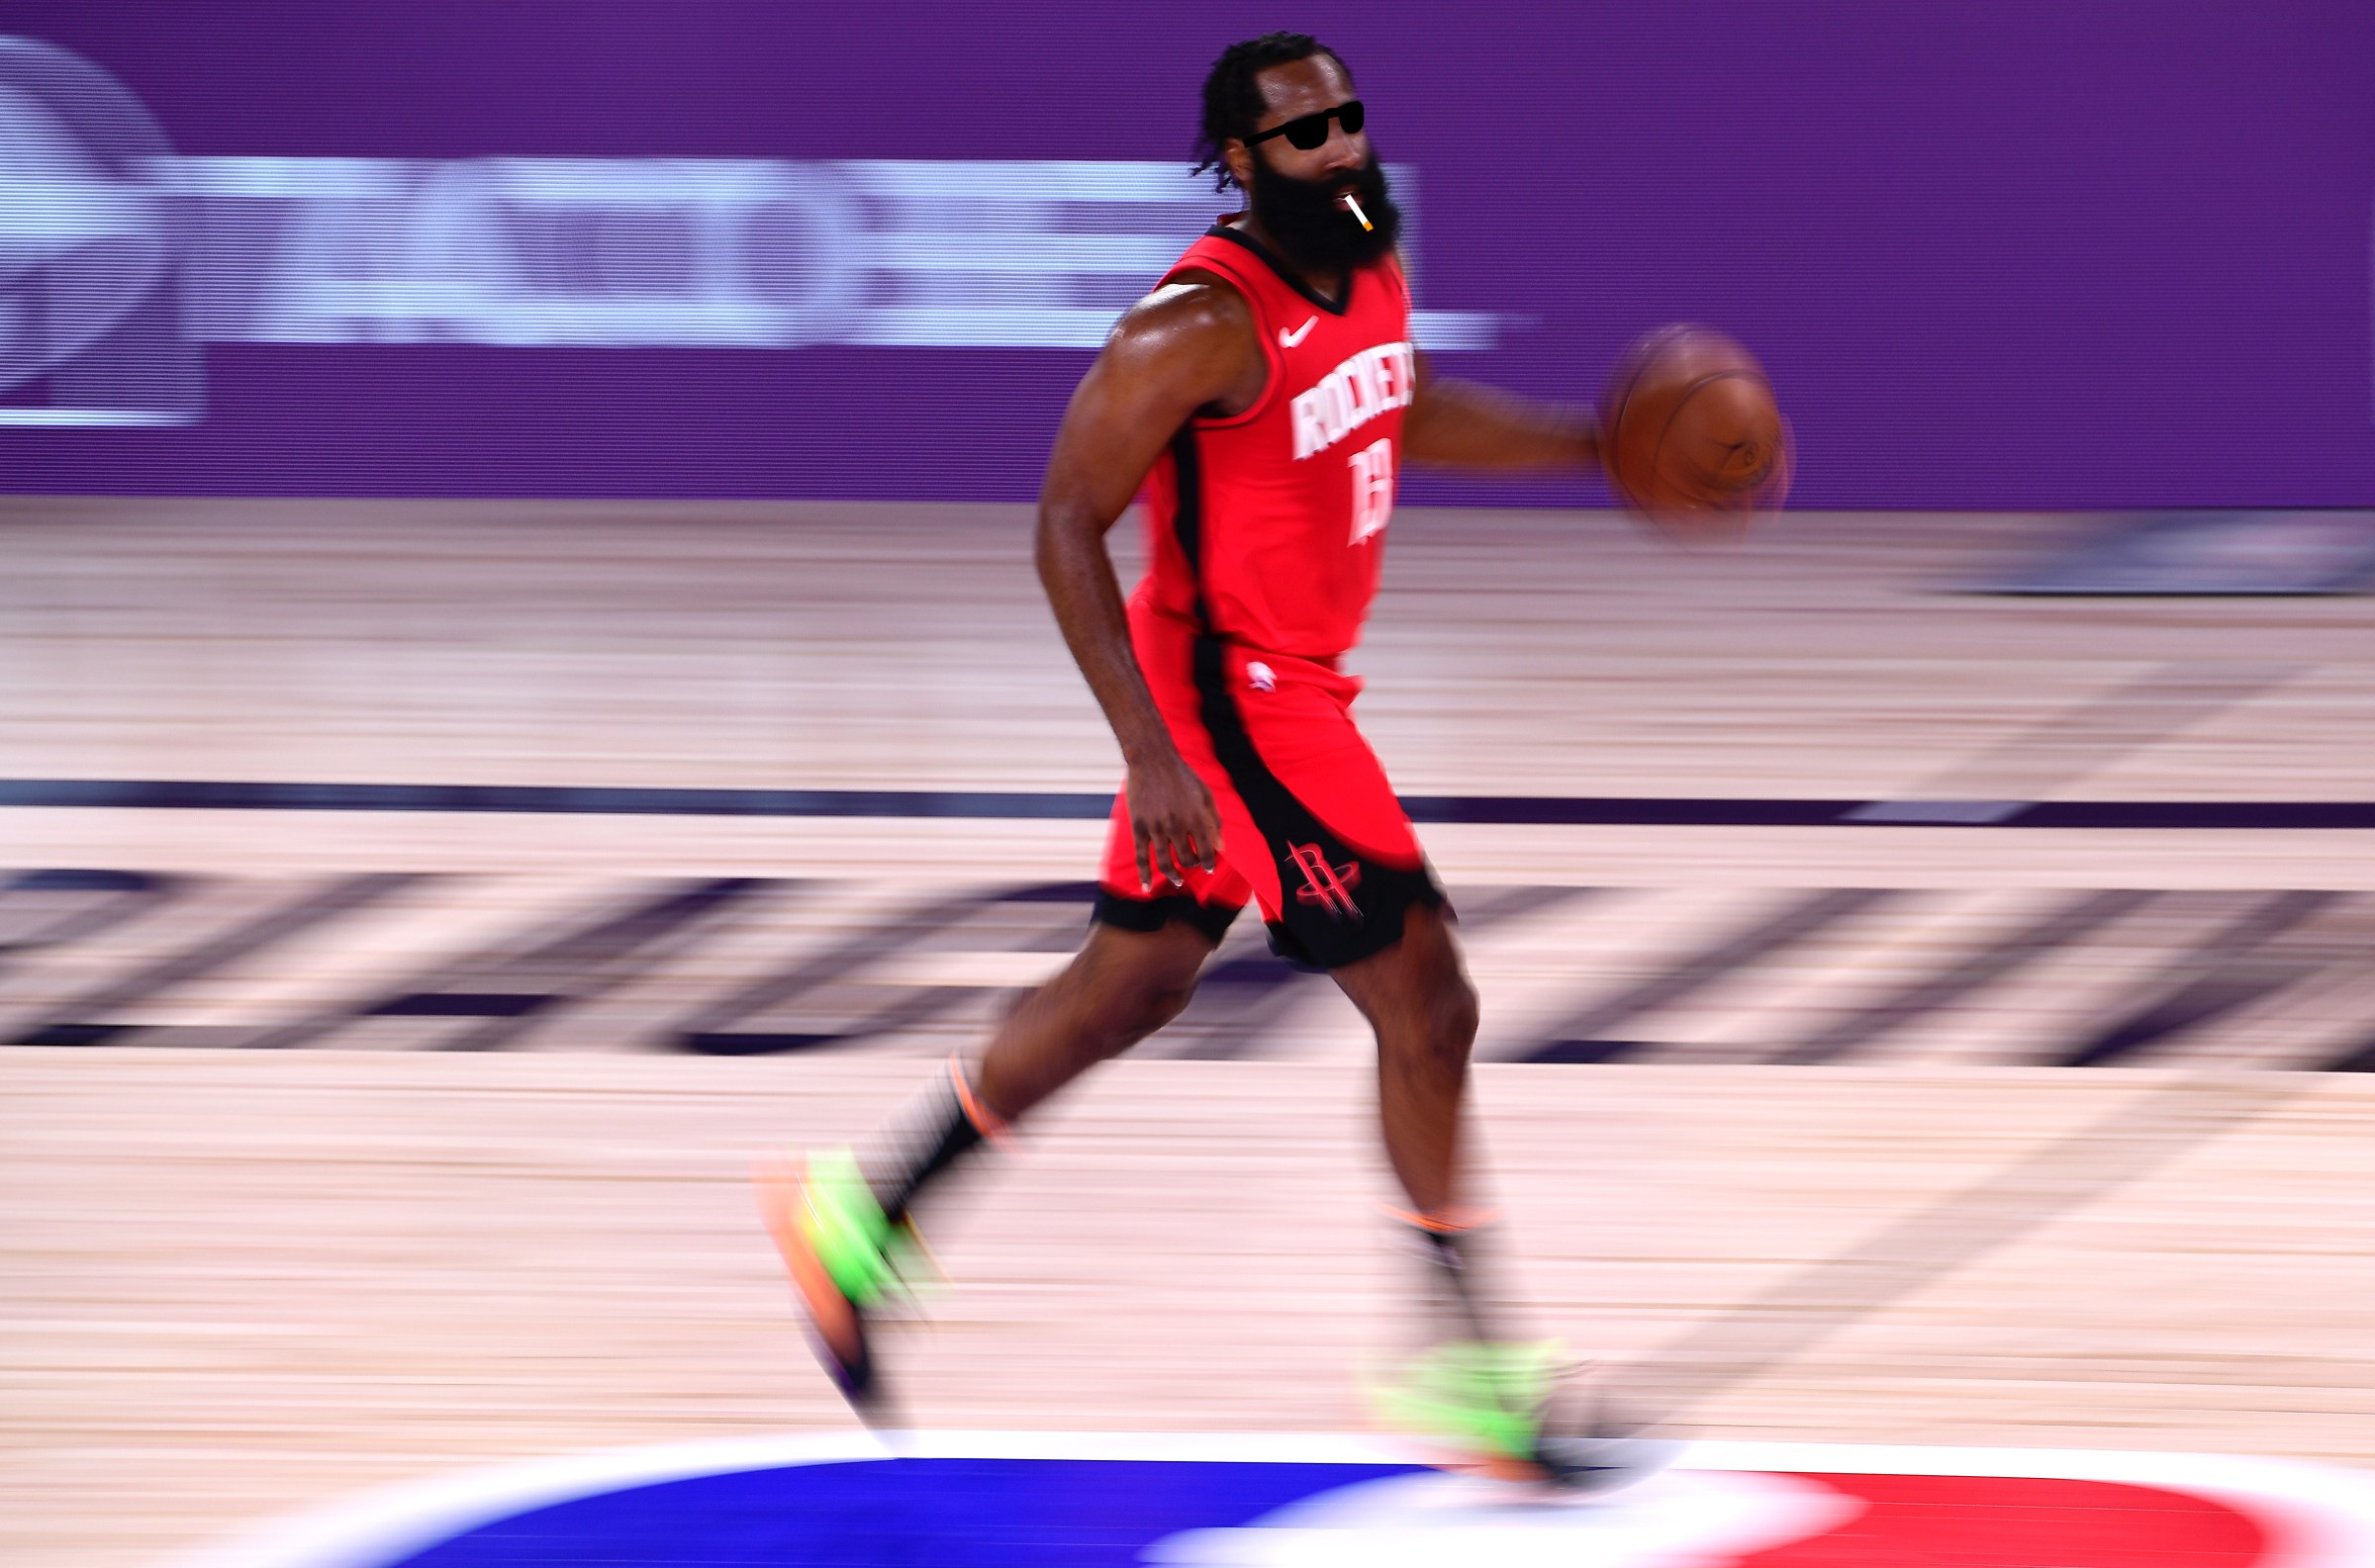 James Harden looking extremely cool